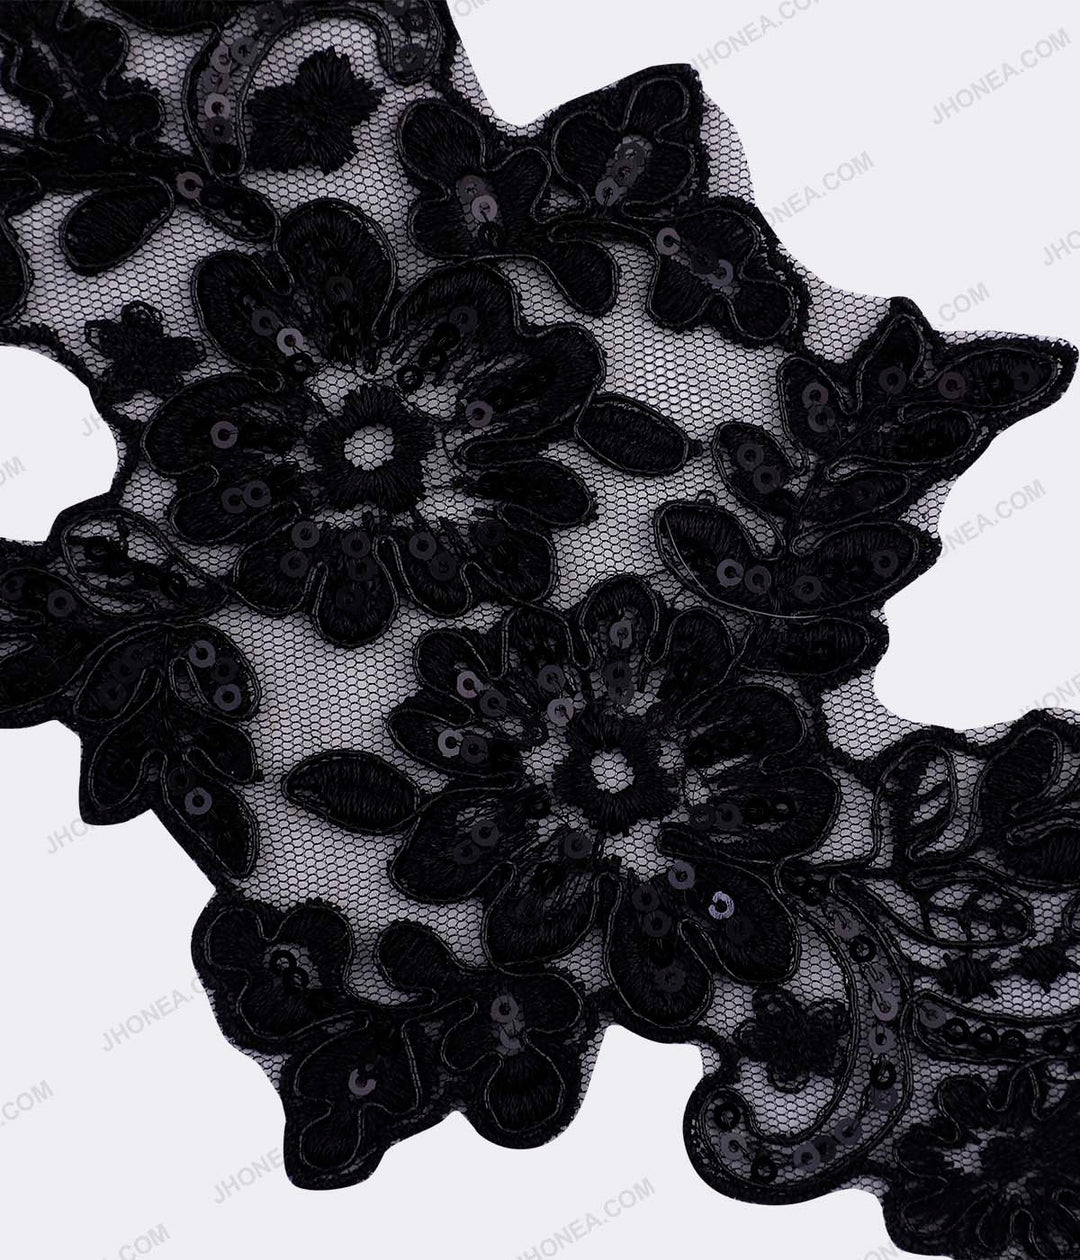 Shiny Black Sequins Embroidery Patch for Men/Women Clothing